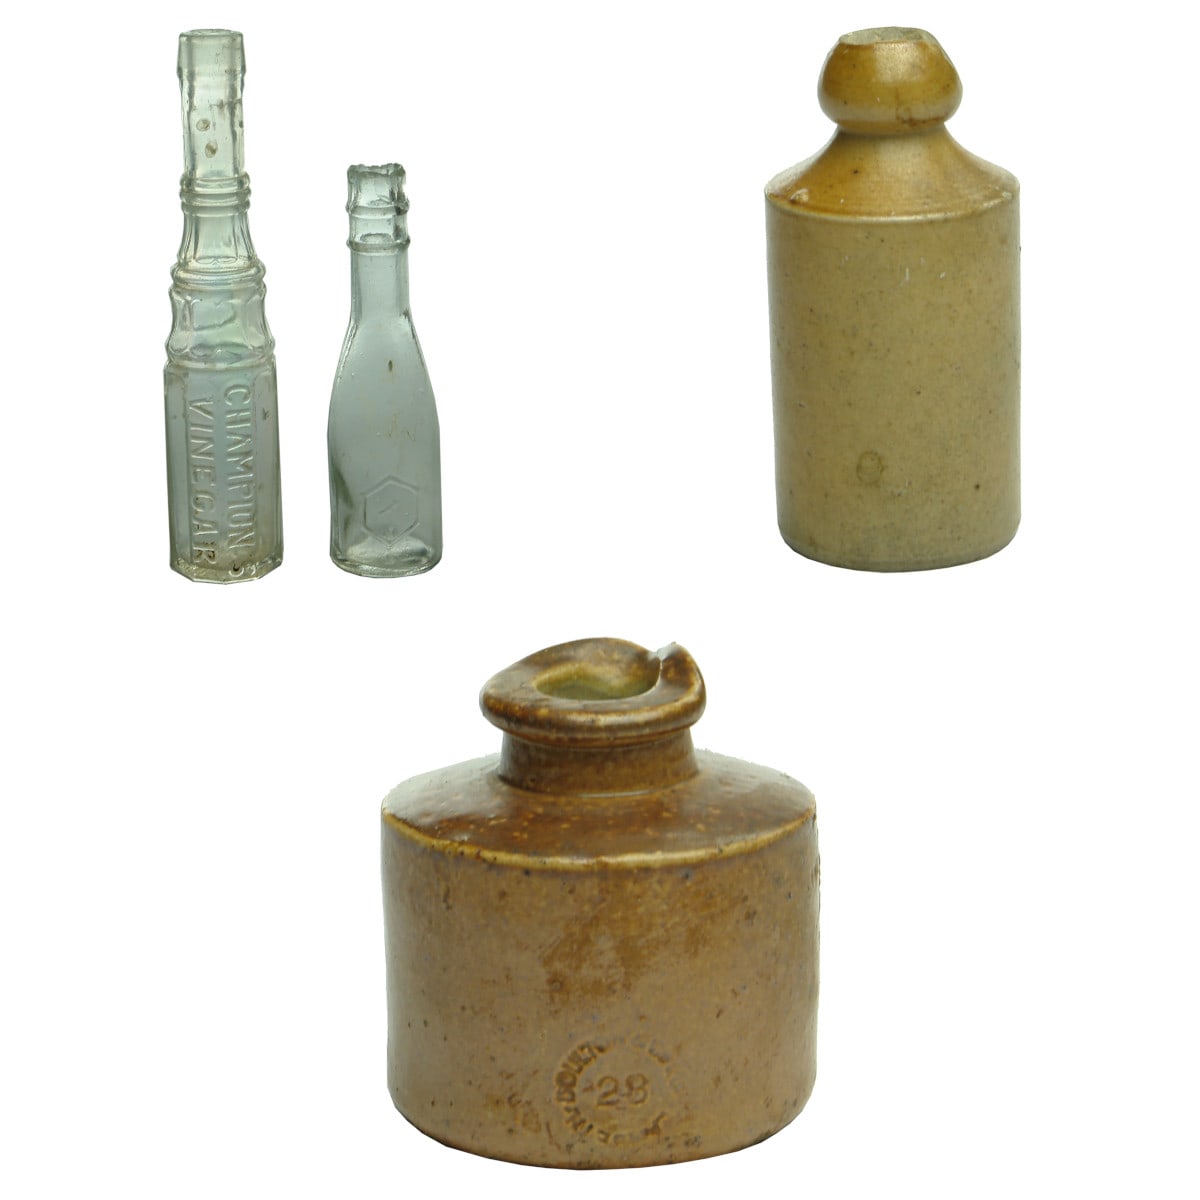 4 Bottles 3 Miniatures and an Ink. Clear Champion's Vinegar; small bottle with hexagon; Doulton Ginger Beer; Doulton Penny Ink with pourer..